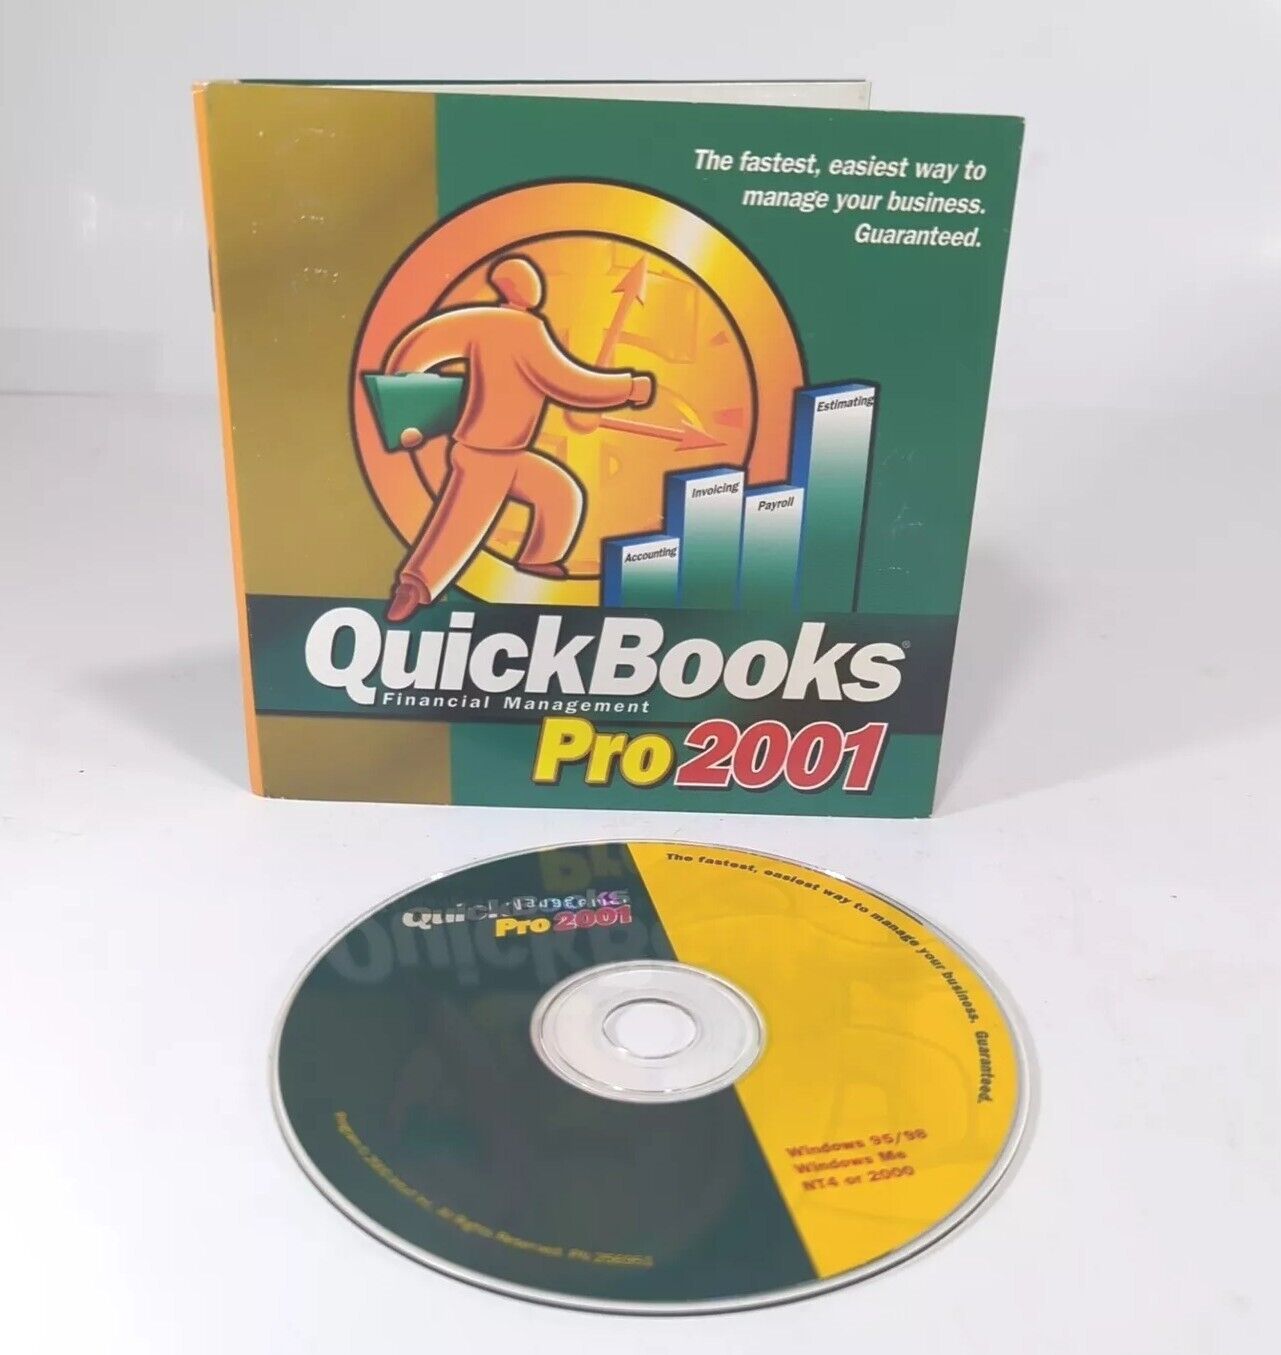 Intuit QuickBooks Pro 2001 Financial Management Software for Windows W/ Key Code